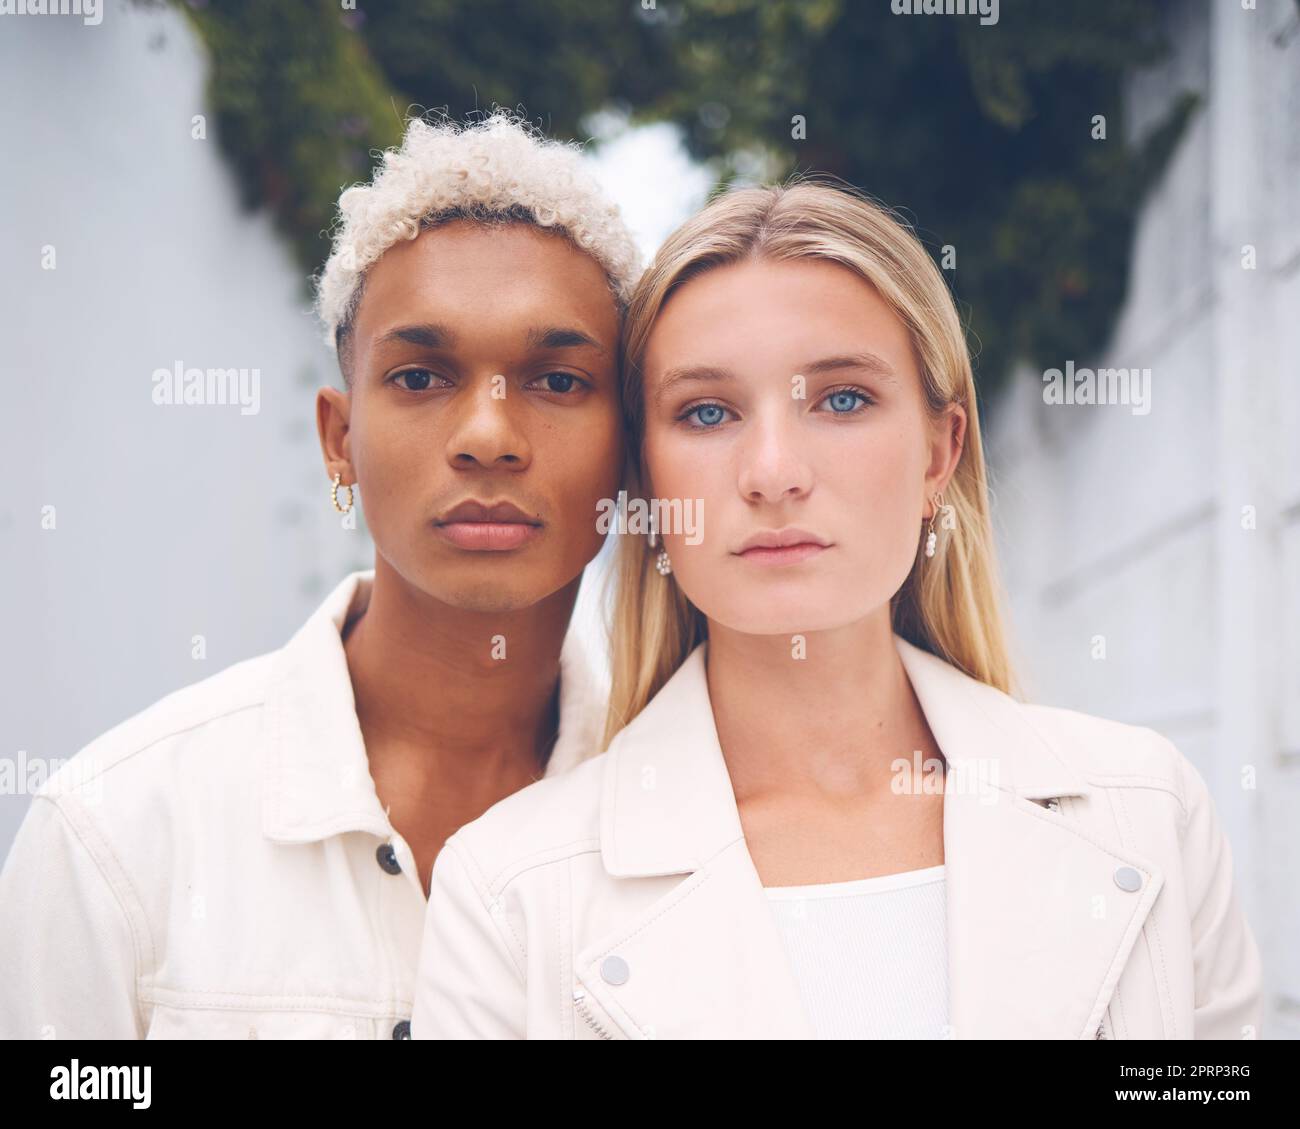 Model designer, love and diversity couple portrait of couple or friends in street style or spring clothing at work. Partnership, influencer and design with beauty, creative and stylish man and woman Stock Photo